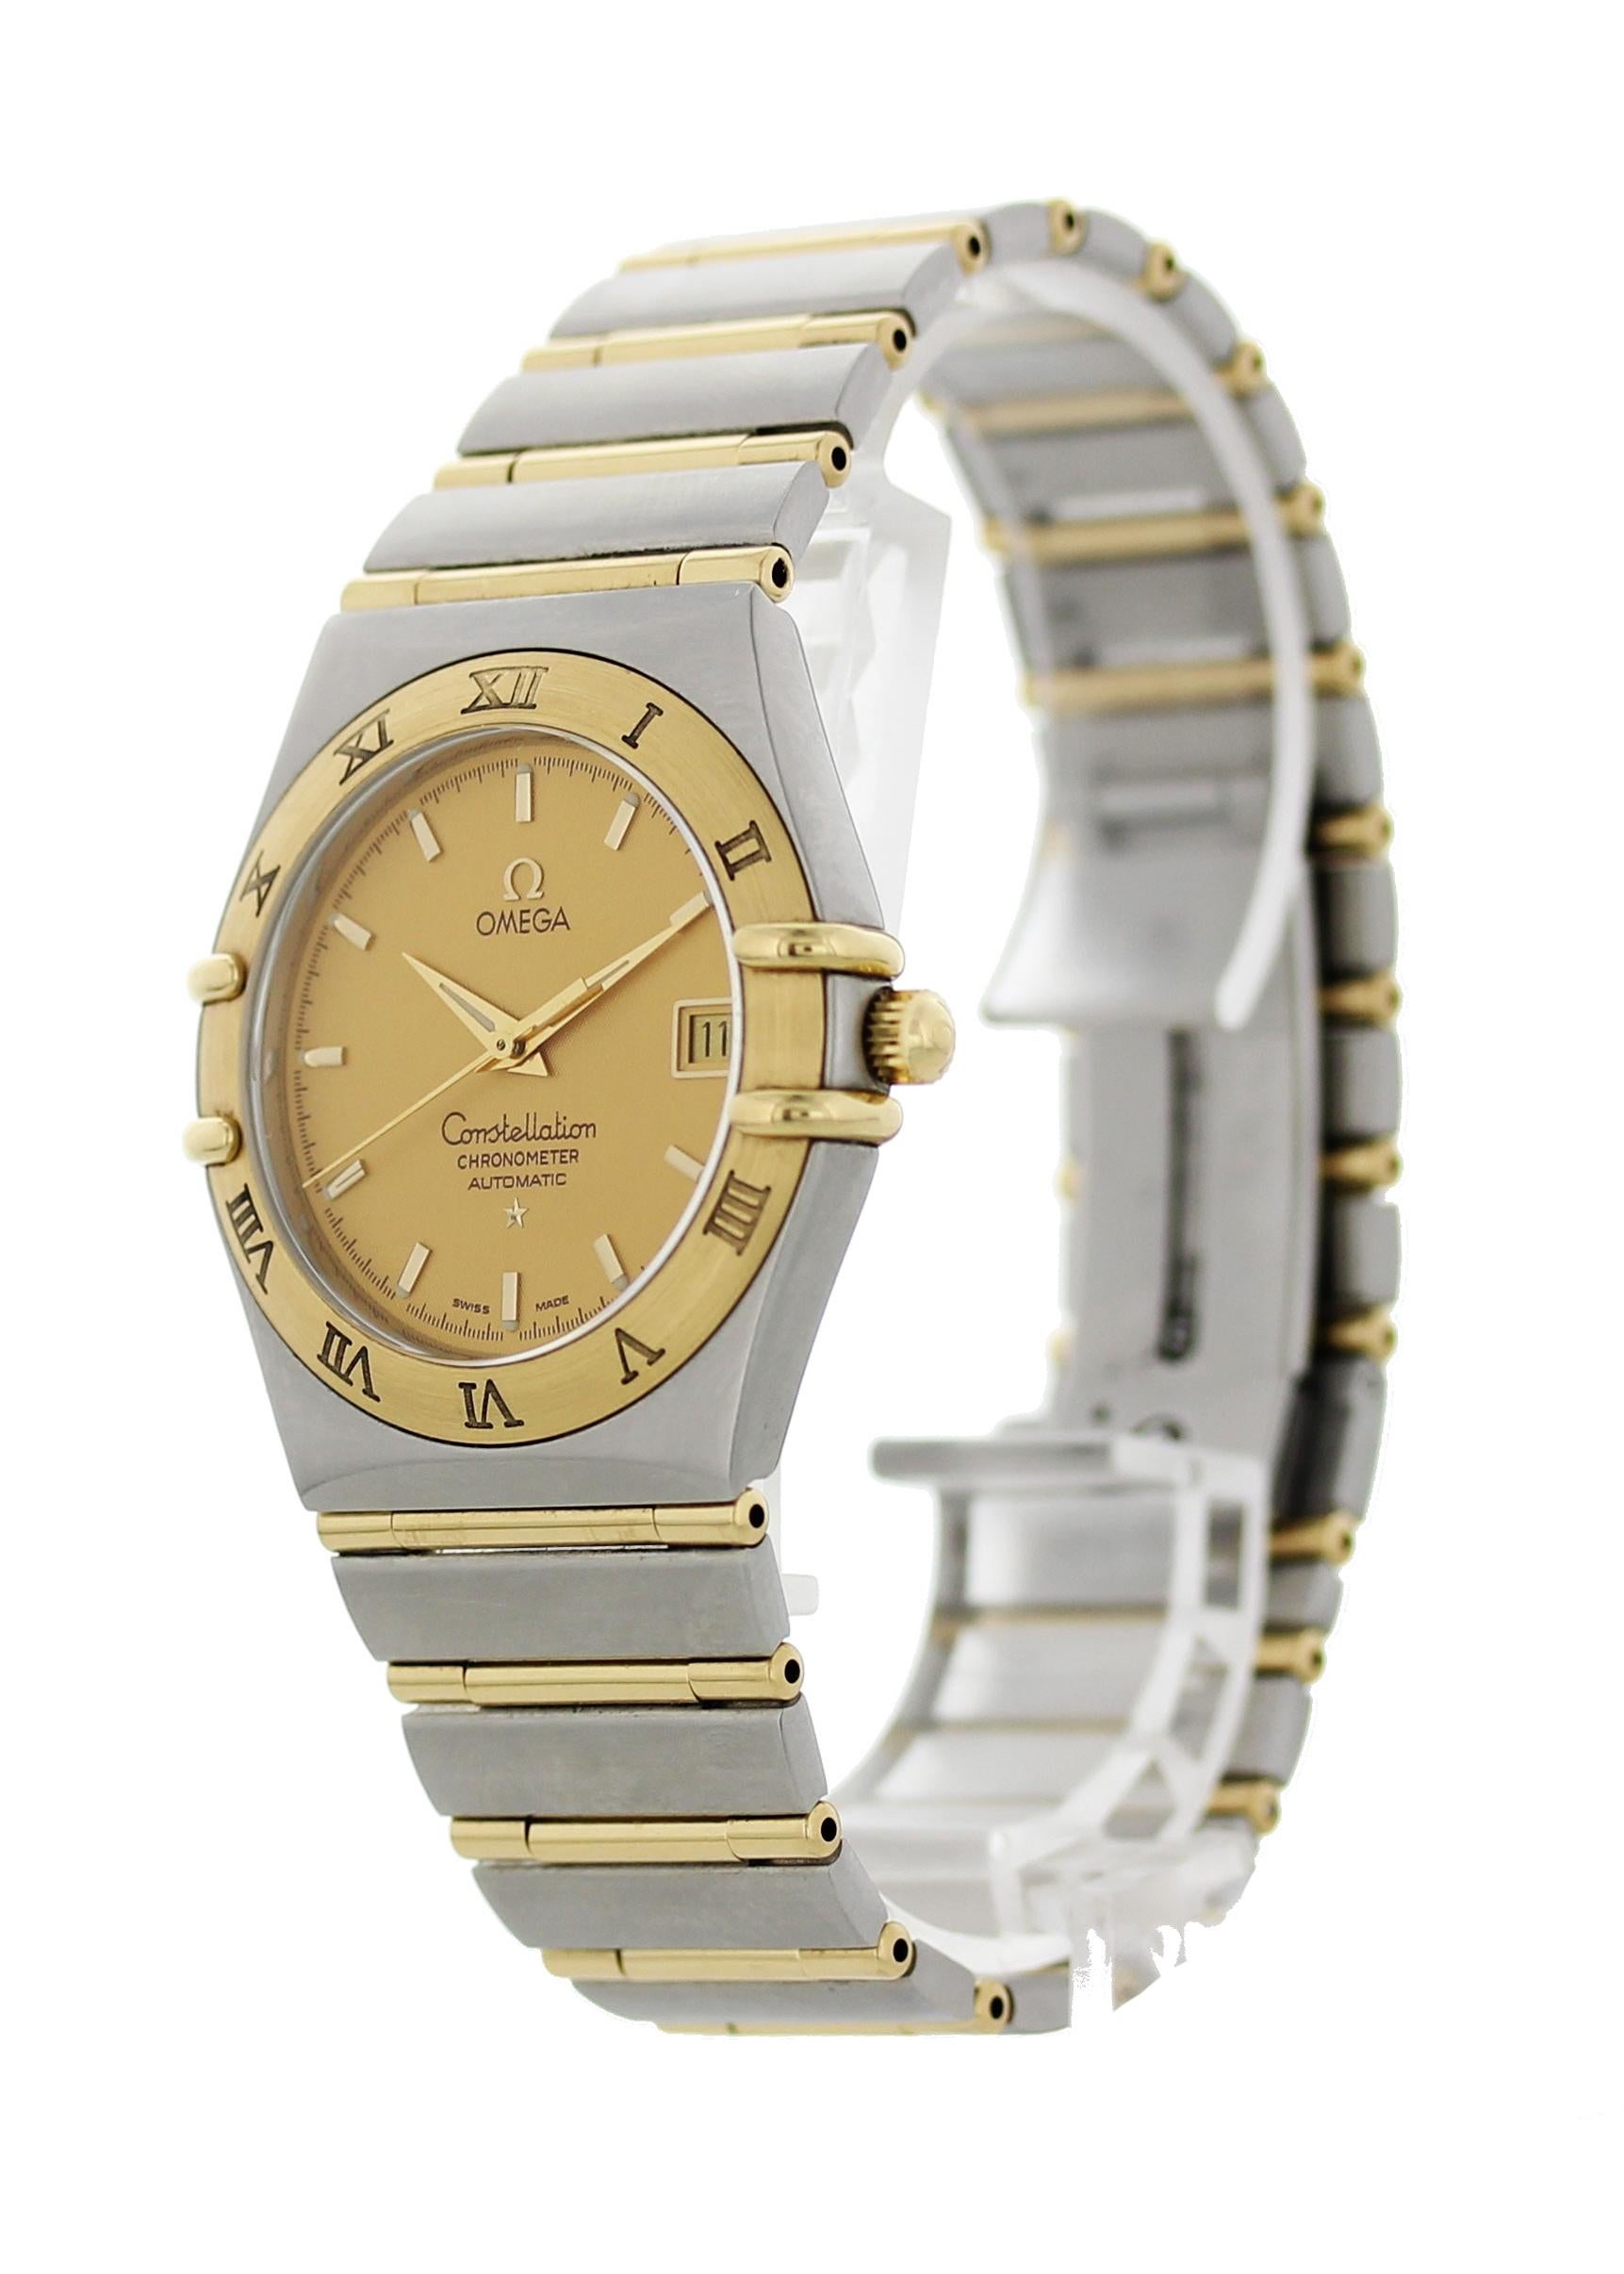 Omega Constellation 1202.10 Automatic Watch. 35mm stainless steel case. 18k yellow gold fixed bezel with black roman numerals. Gold dial with gold numerals markers and hands. Date aperture at 3 o'clock. Stainless steel band with full gold bars. Will